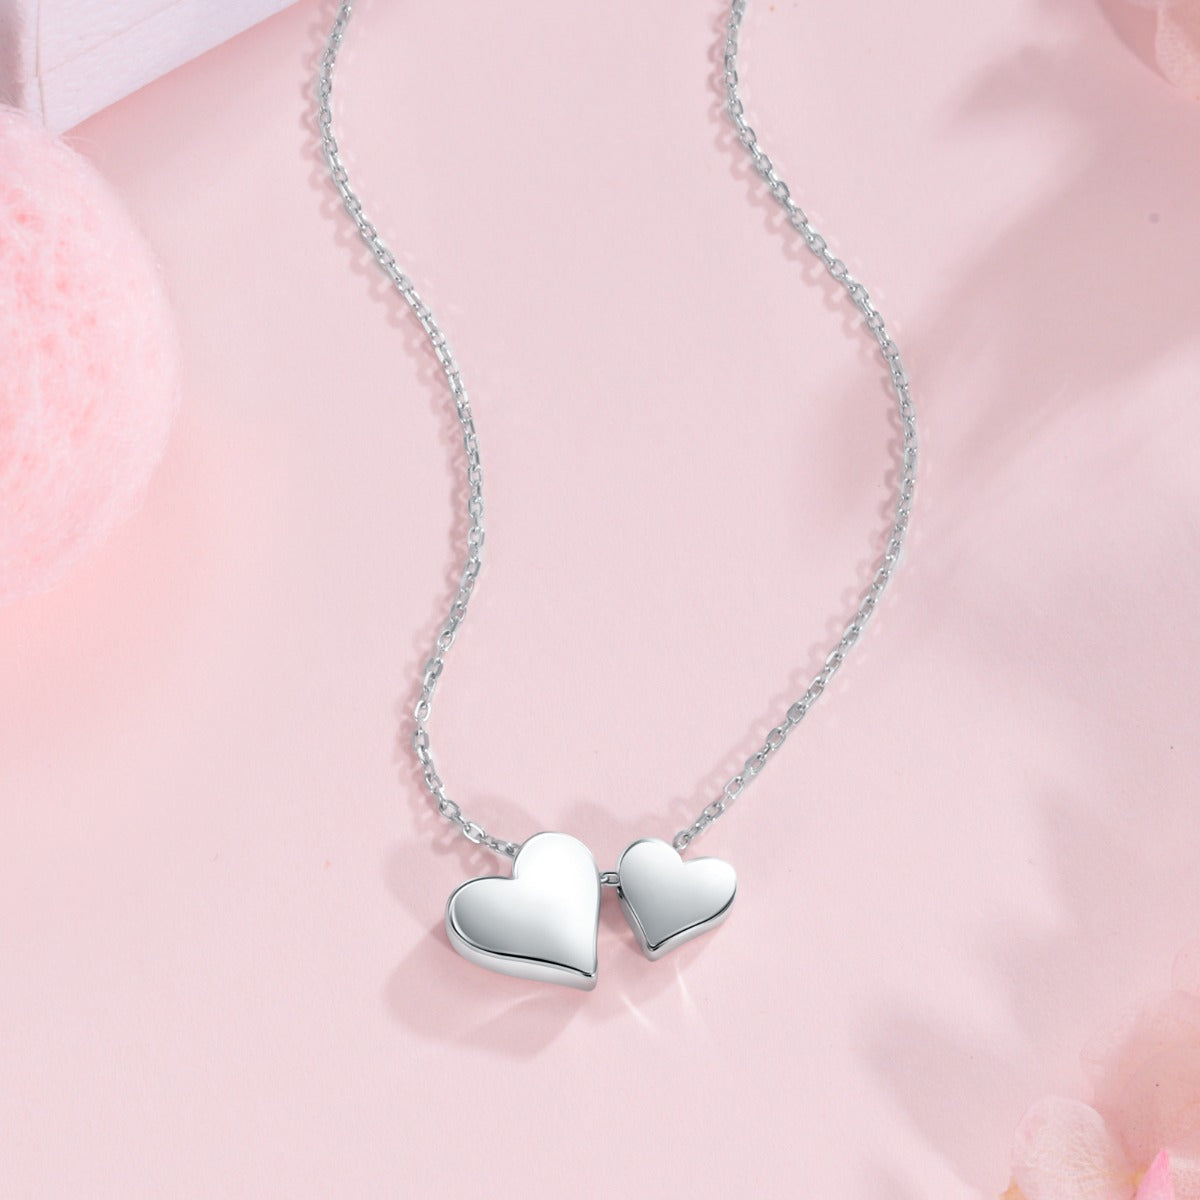 S925 Silver Double Heart Necklace